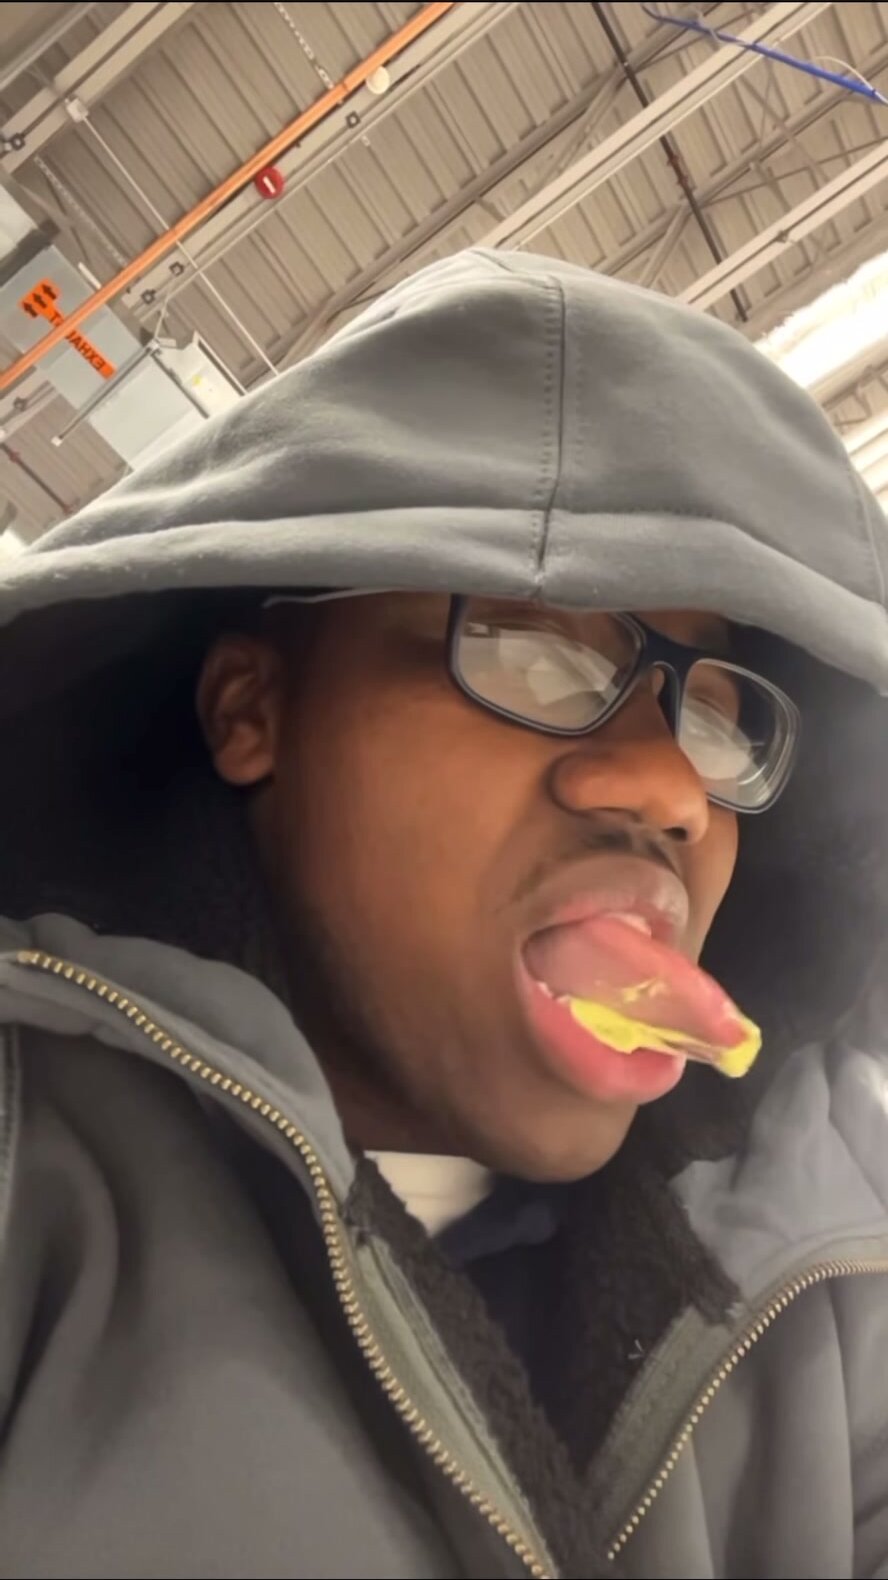 Black guy tongue out with gum